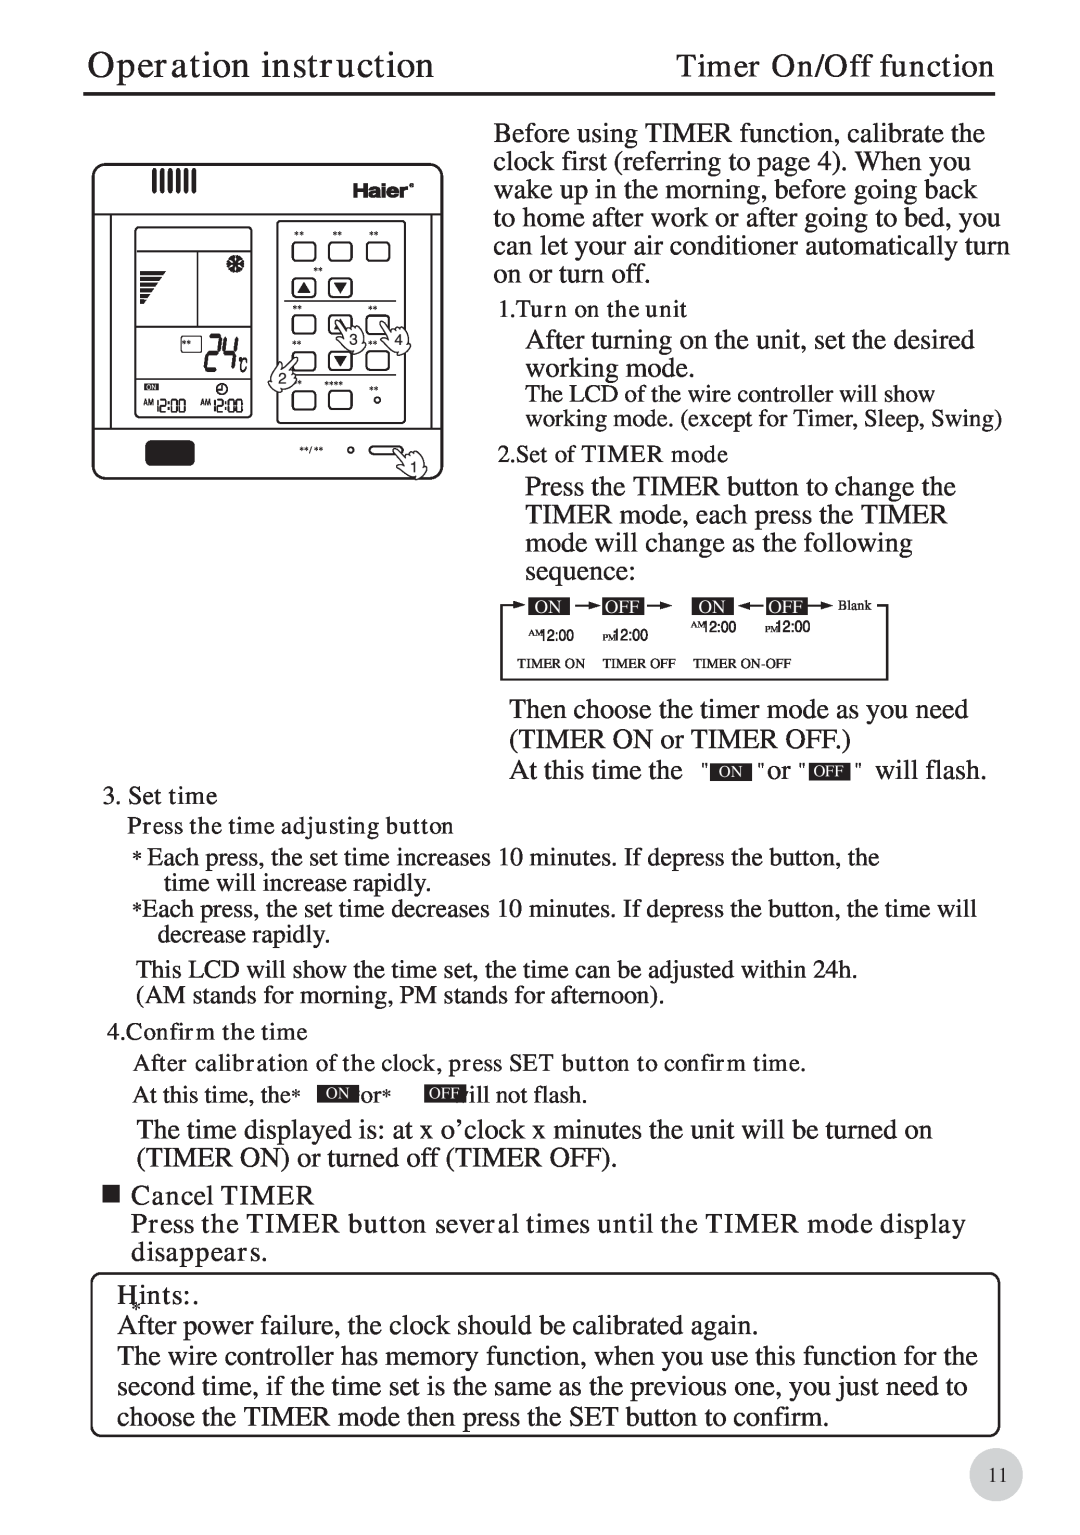 Haier 0010571570, AB212BCBAA manual Timer On/Off function, Operation instruction 